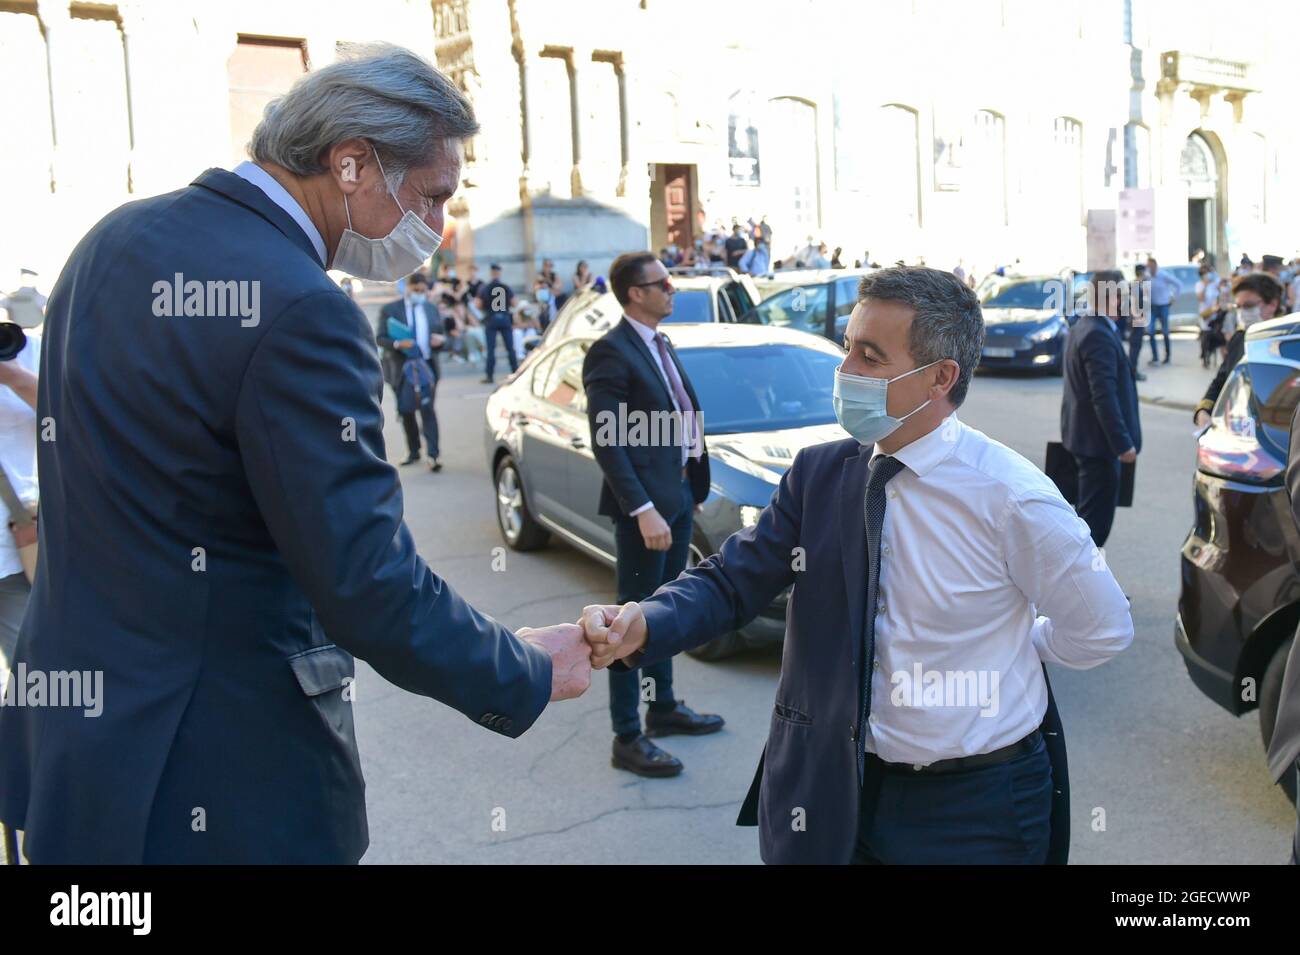 Arles, Bouches-du-Rhone, France. 18th Aug, 2020. Patrick de Carolis, mayor of Arles, shakes hands with Gerald Darmanin, Minister of the Interior upon his arrival for the press conference at Arles City Hall.In order to reinforce the fight against delinquency and drug trafficking the government signed ''integrated security contracts'' with the cities. These contracts include additional resources provided by the state in terms of personnel and equipment in exchange for increased investment in public security by the cities. (Credit Image: © Laurent Coust/SOPA Images via ZUMA Press Wire) Stock Photo